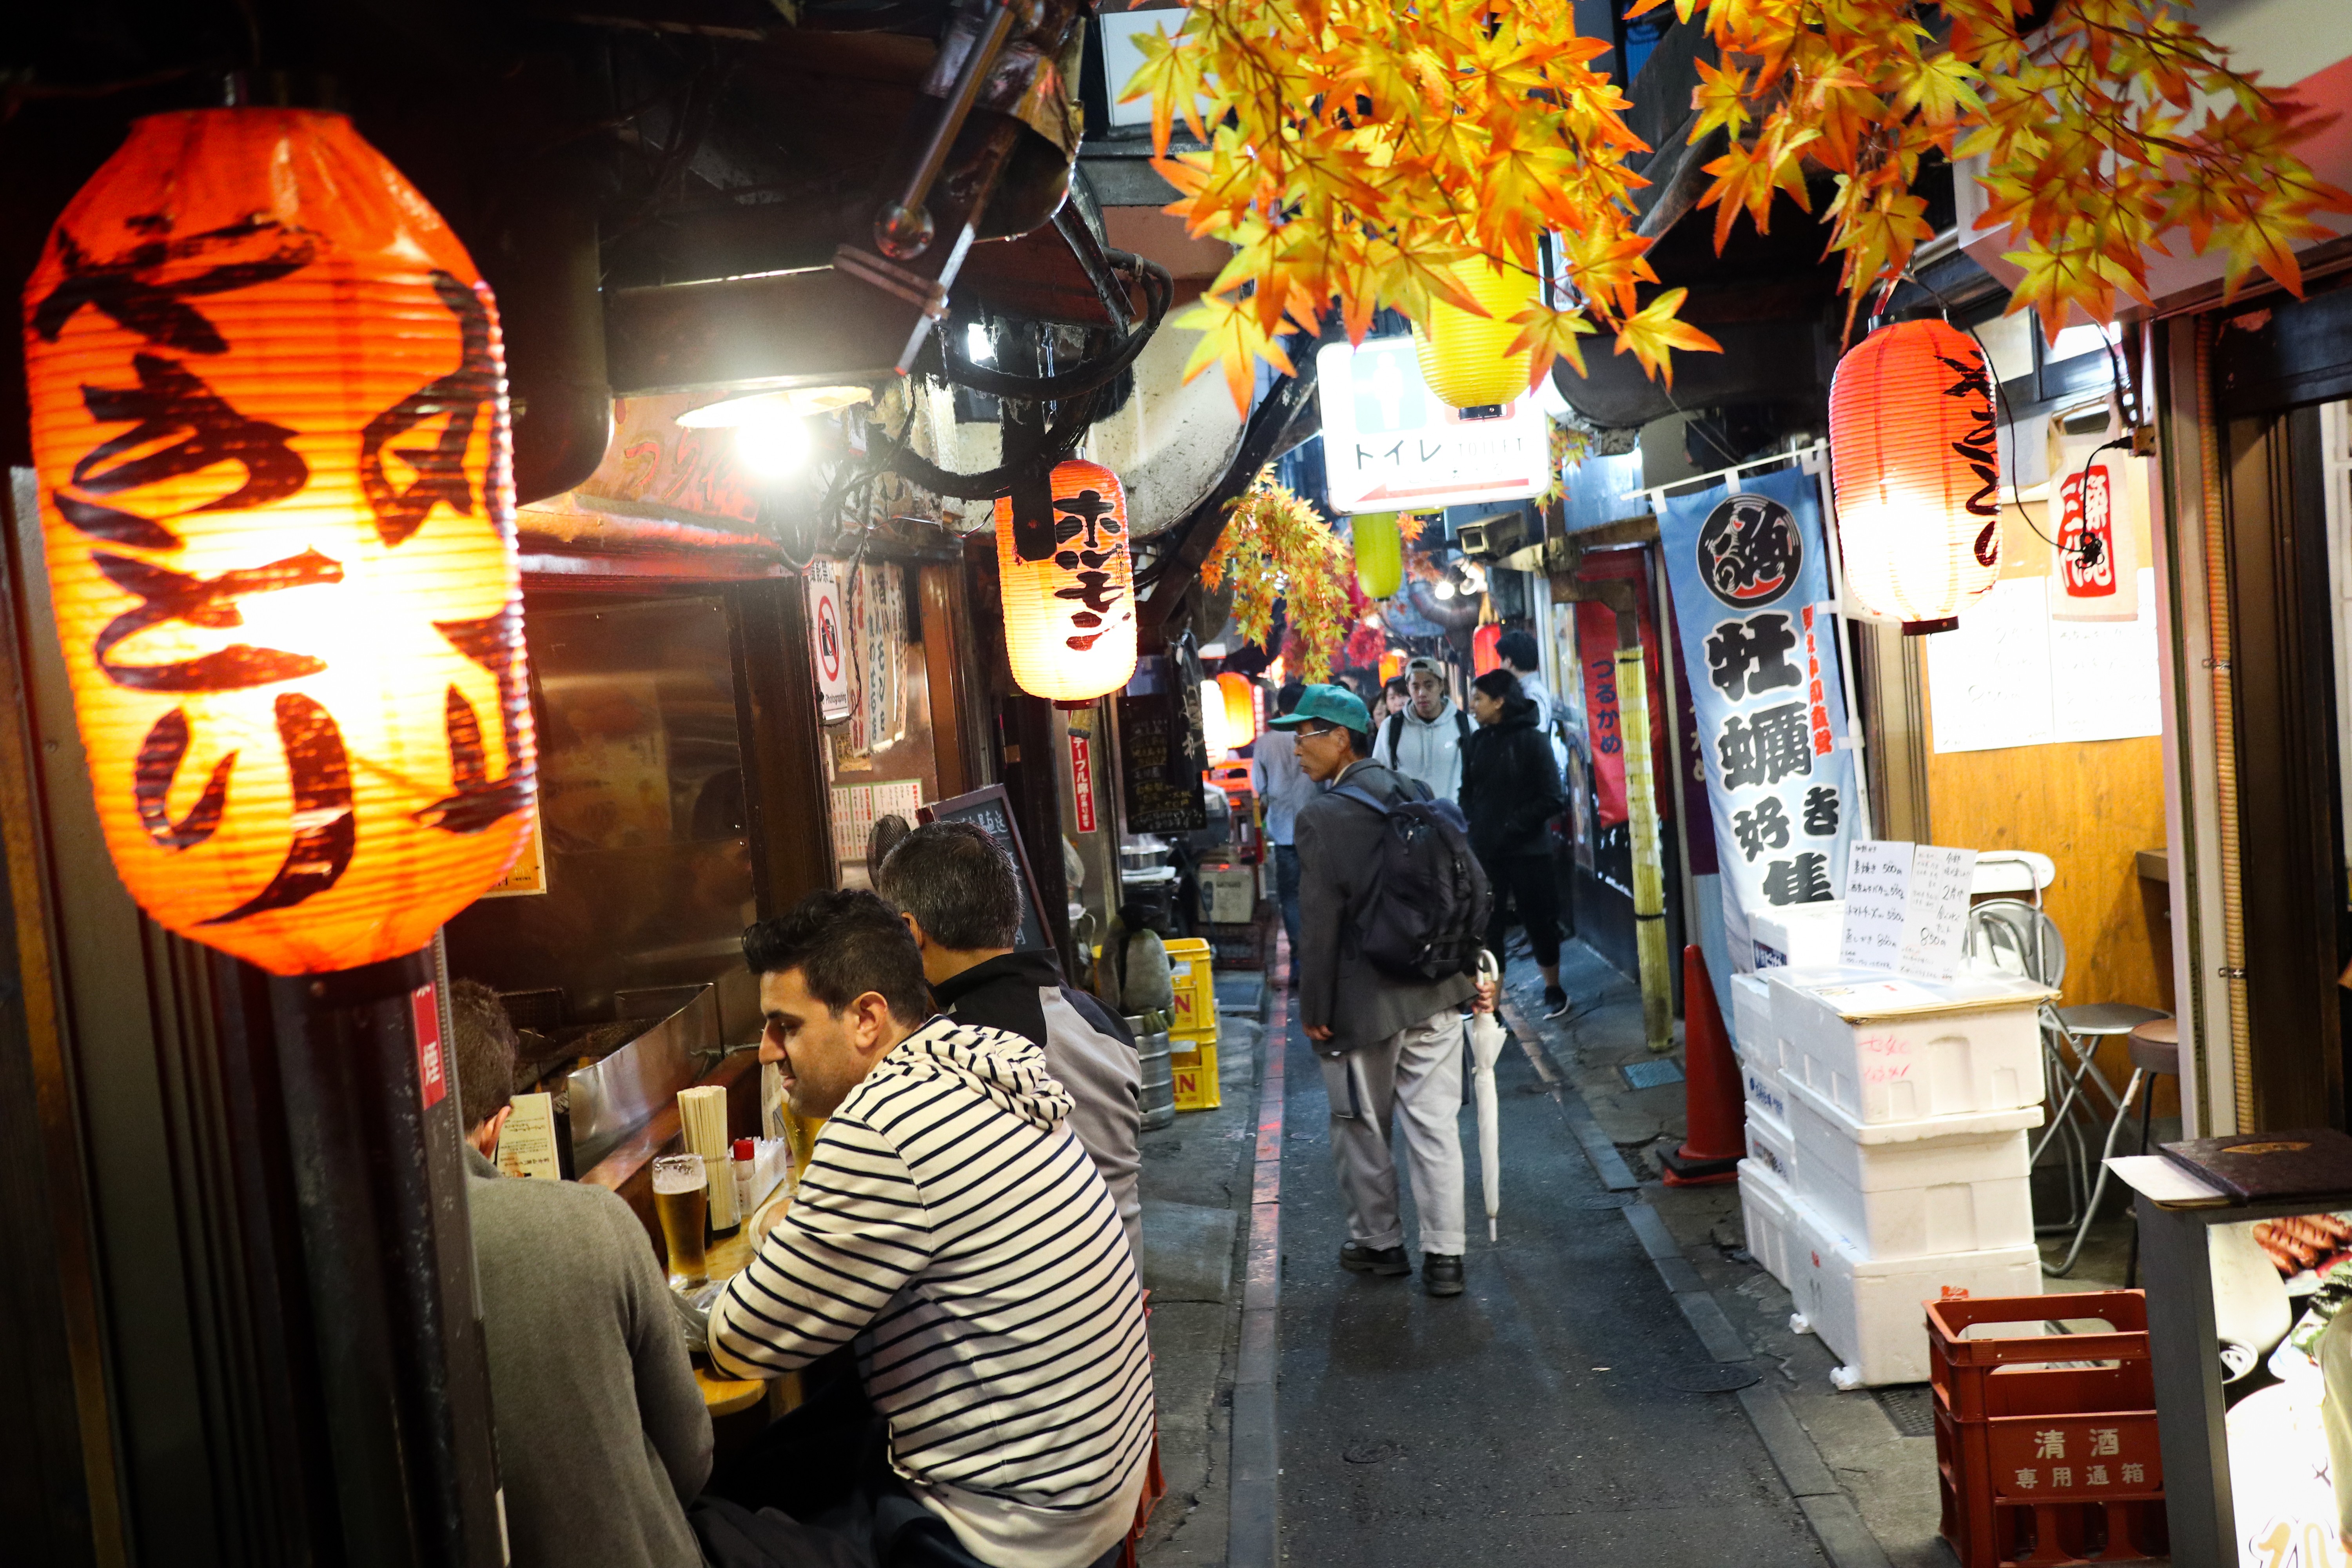 Shinjuku is one of the most popular night hot spots in Tokyo.